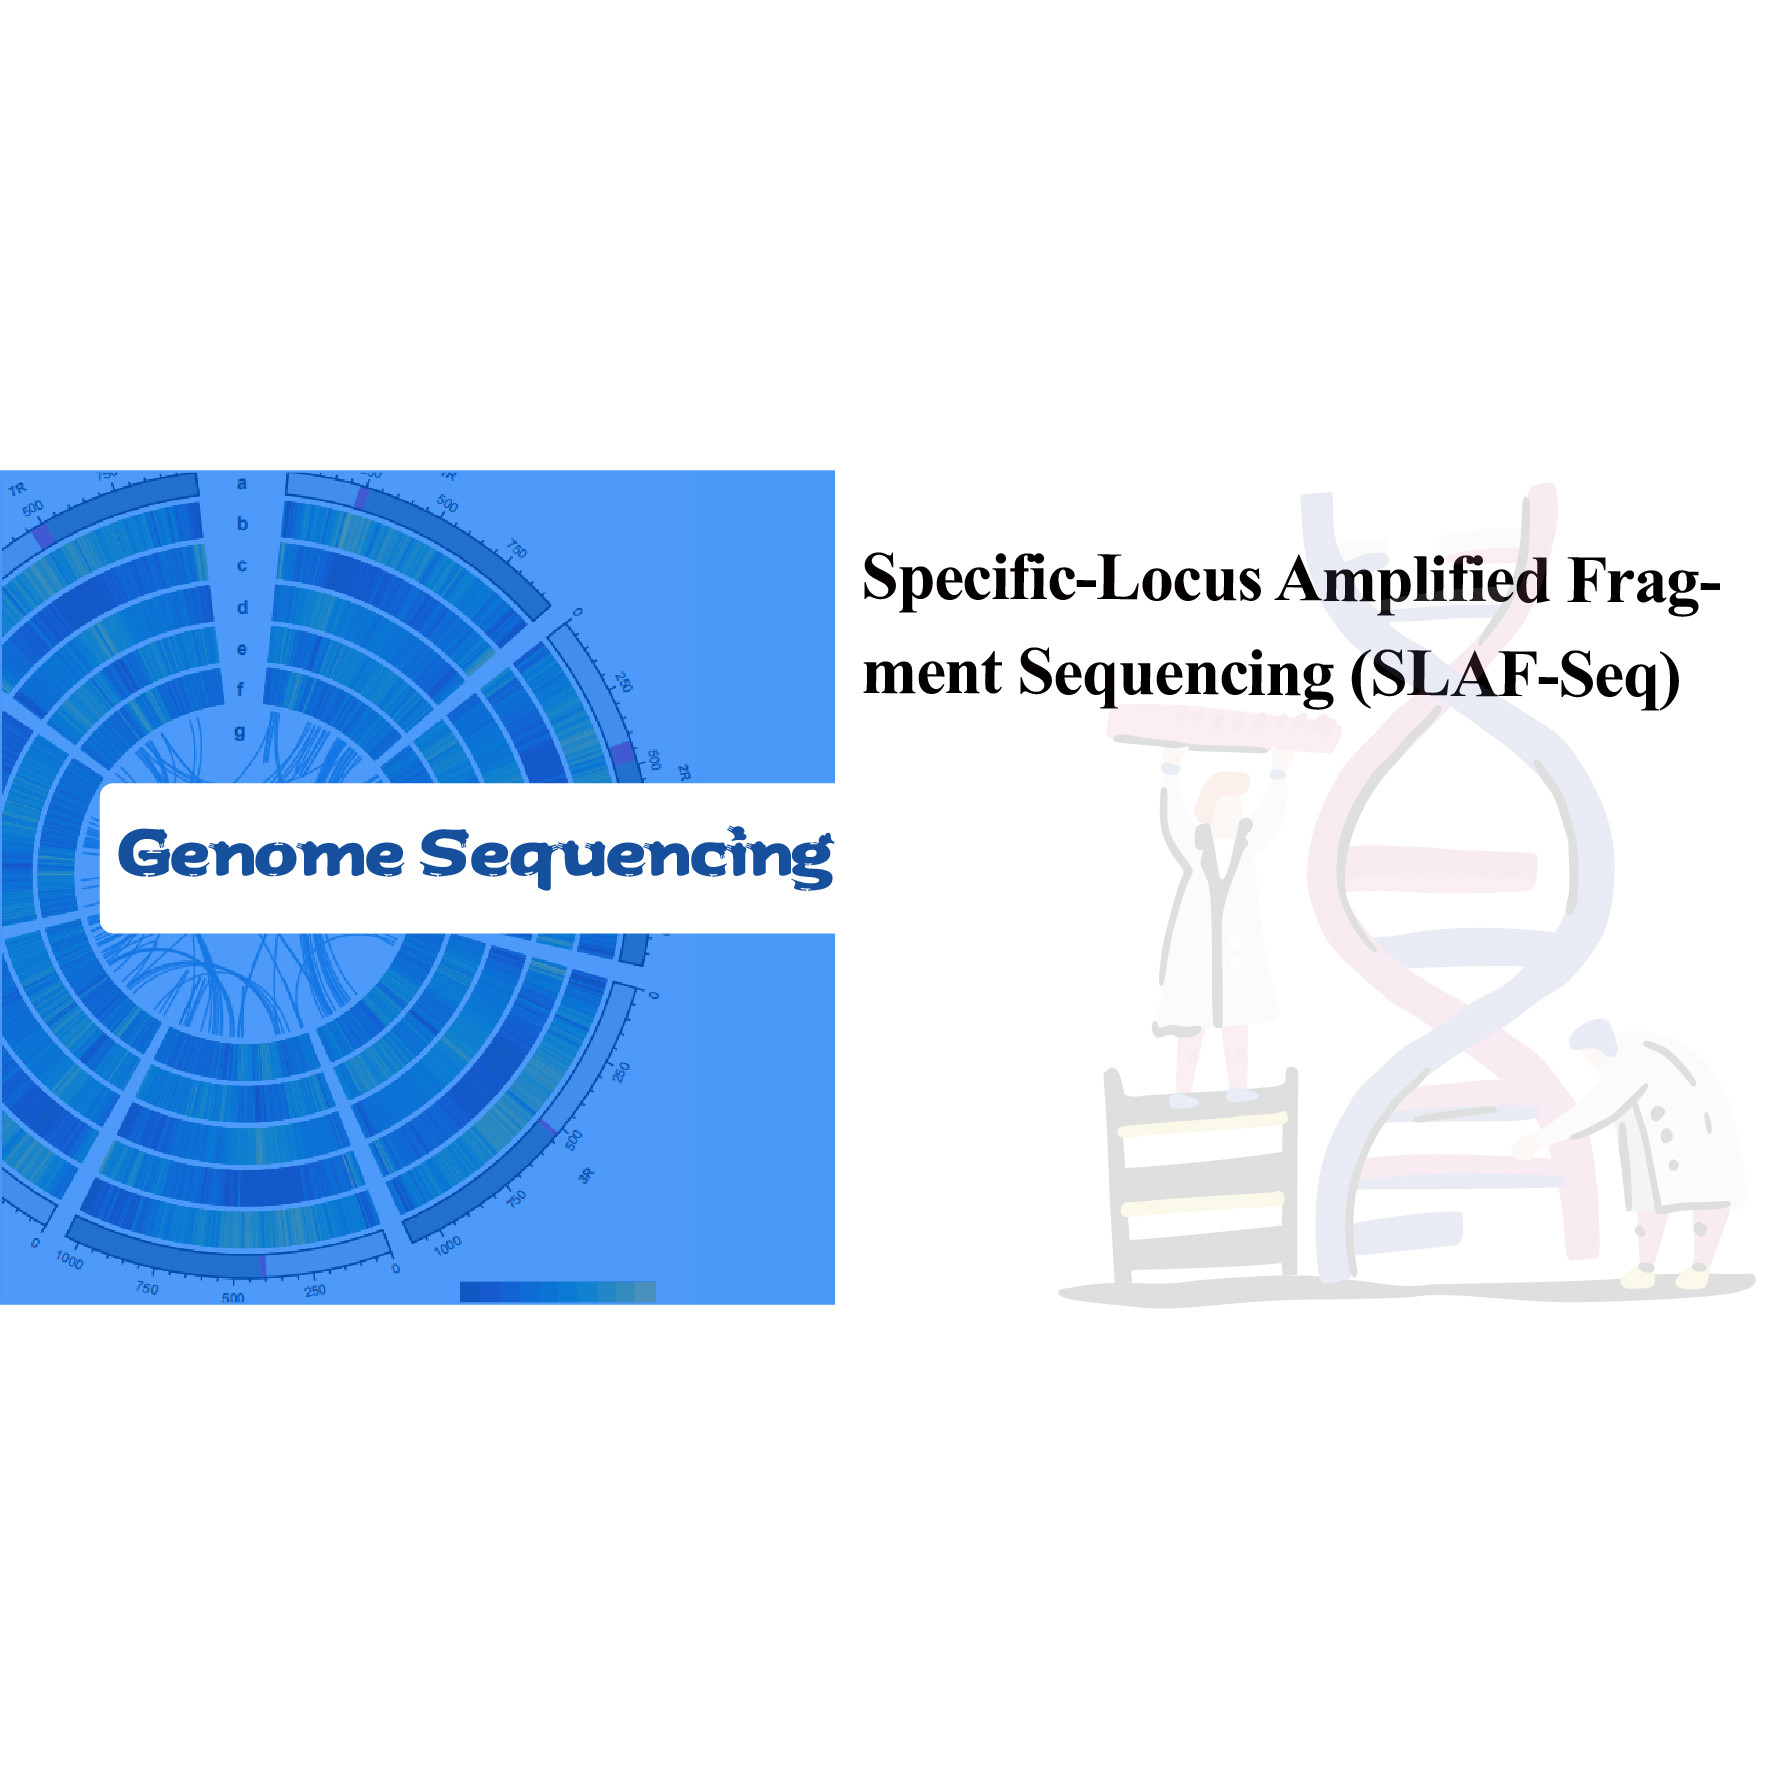 Specific-Locus Amplified Fragment Sequencing (SLAF-Seq)